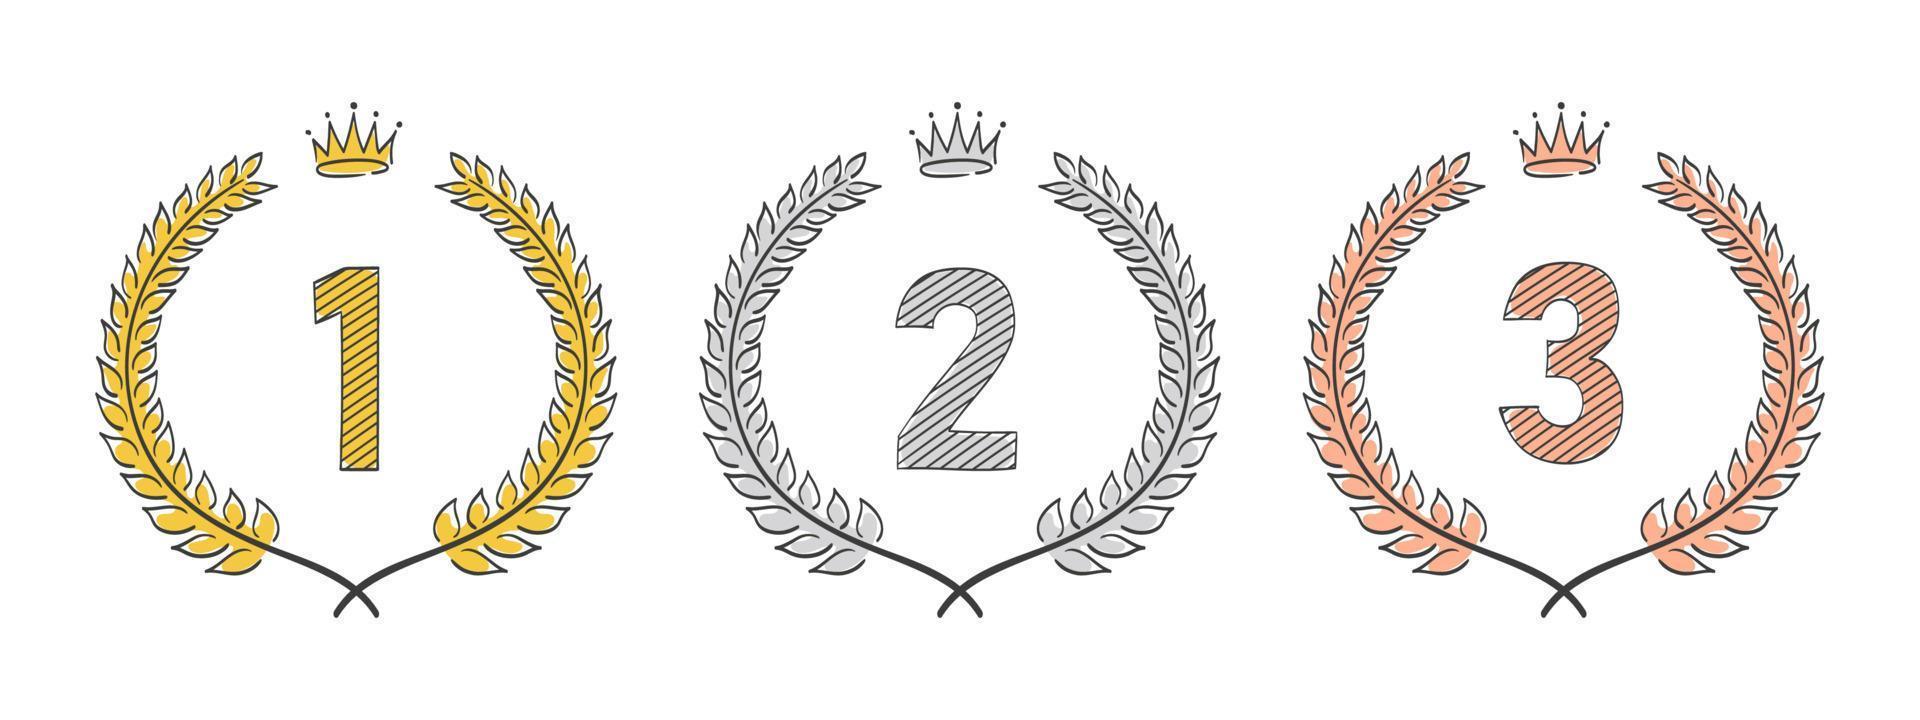 Set of ranking icon with wreaths and crown. Vector illustration of hand drawn wreaths